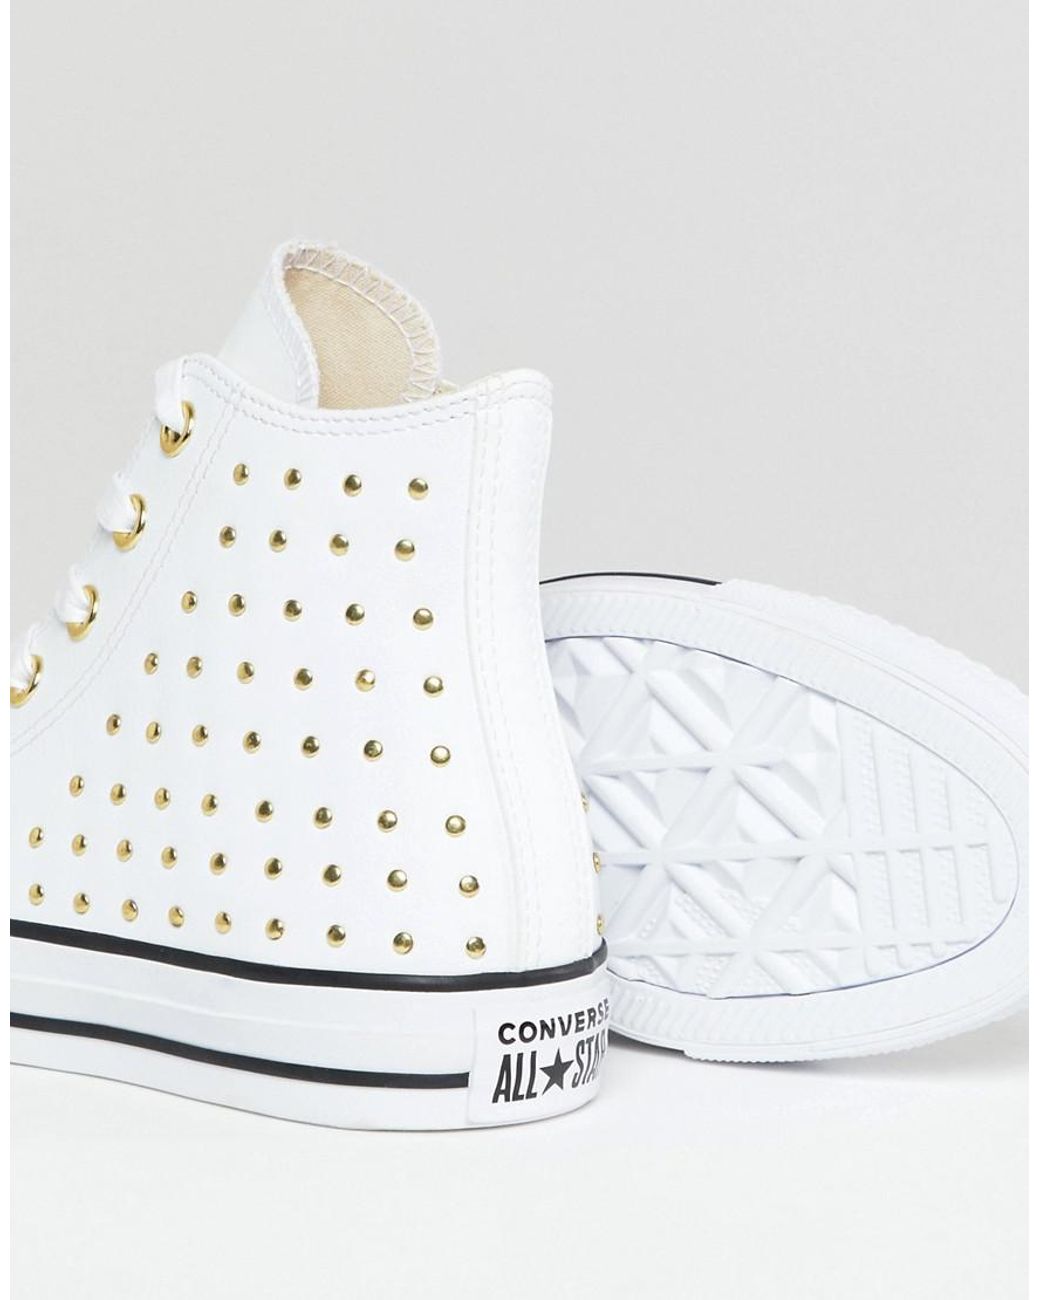 Converse Chuck Taylor All Star Leather Studded Hi Sneakers In White | Lyst